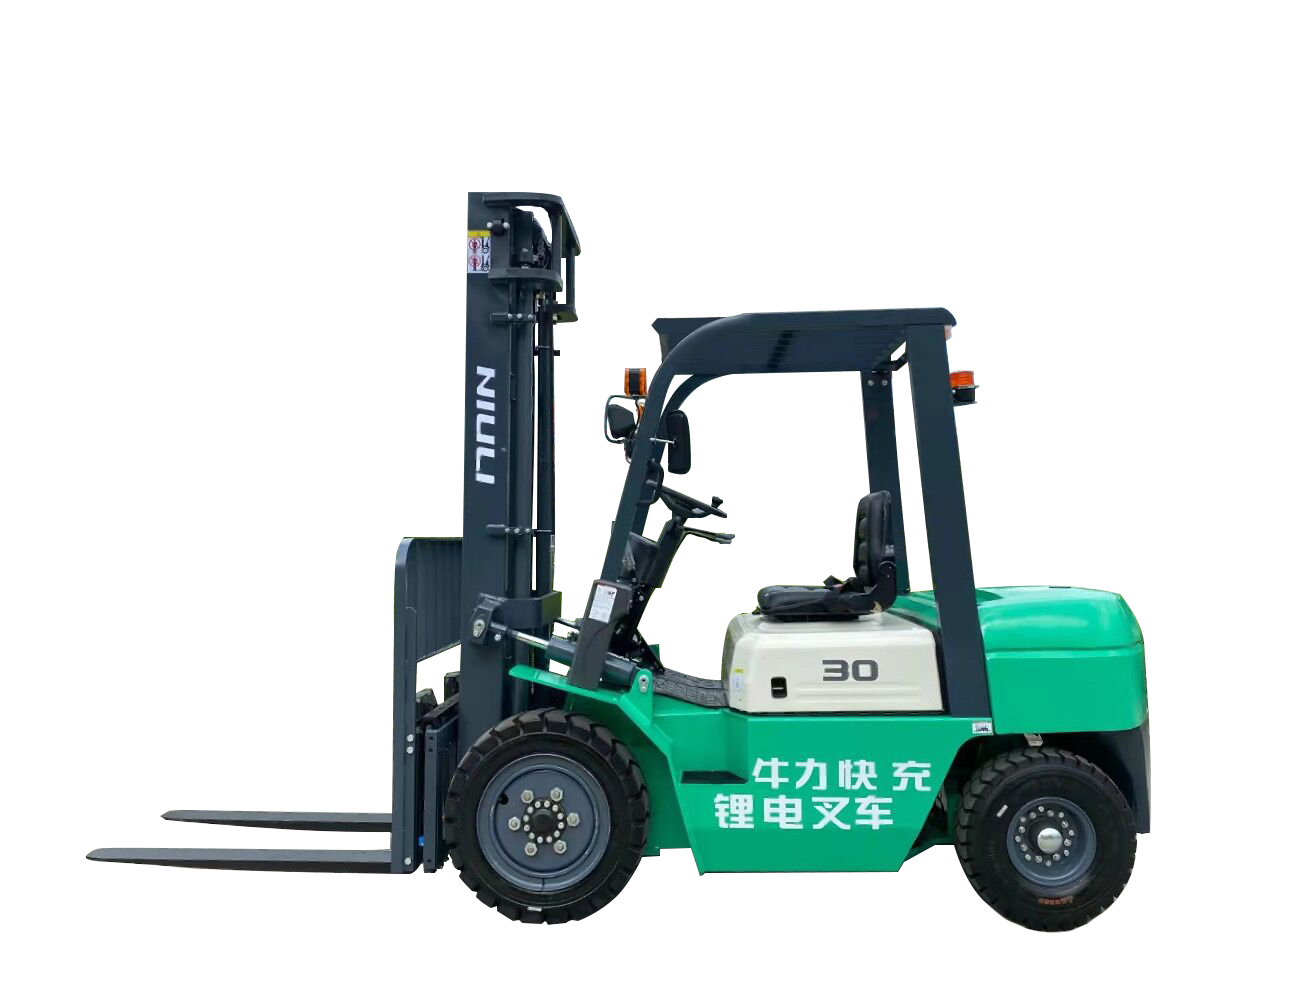 Rough Terrain Forklifts Are a Key Resource for Material Handling Operations